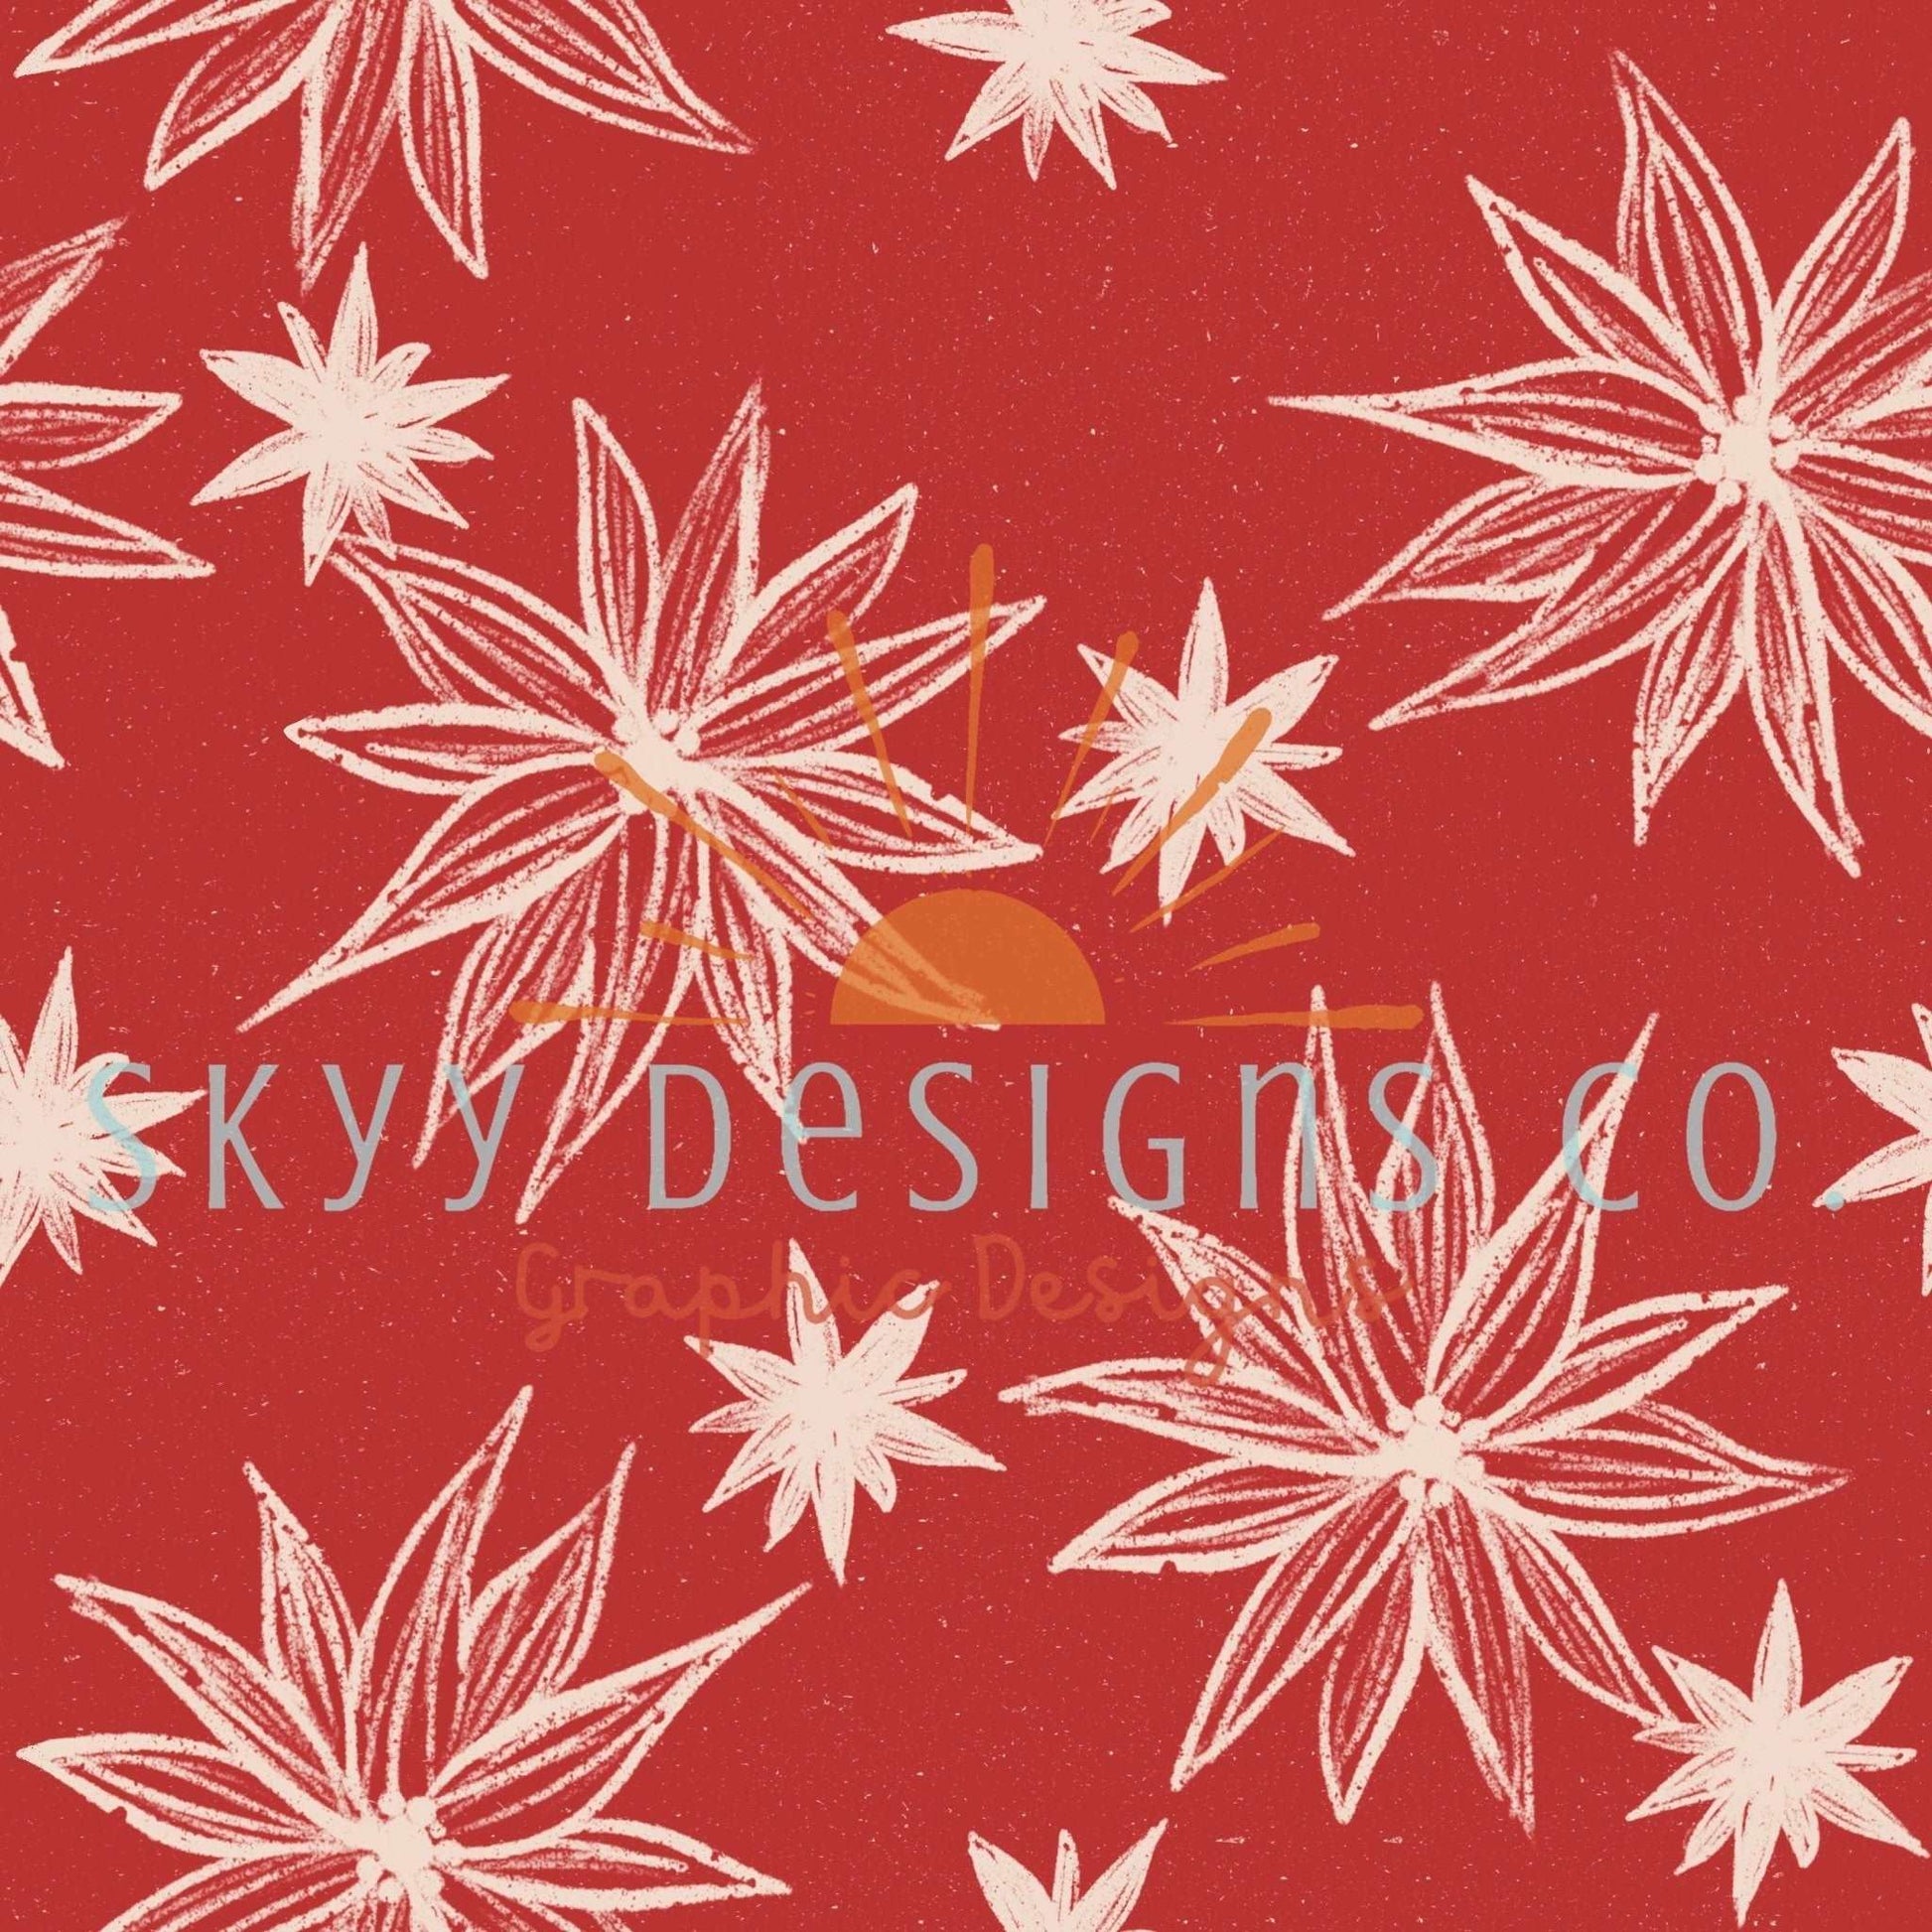 Christmas floral seamless pattern - SkyyDesignsCo | Seamless Pattern Designs